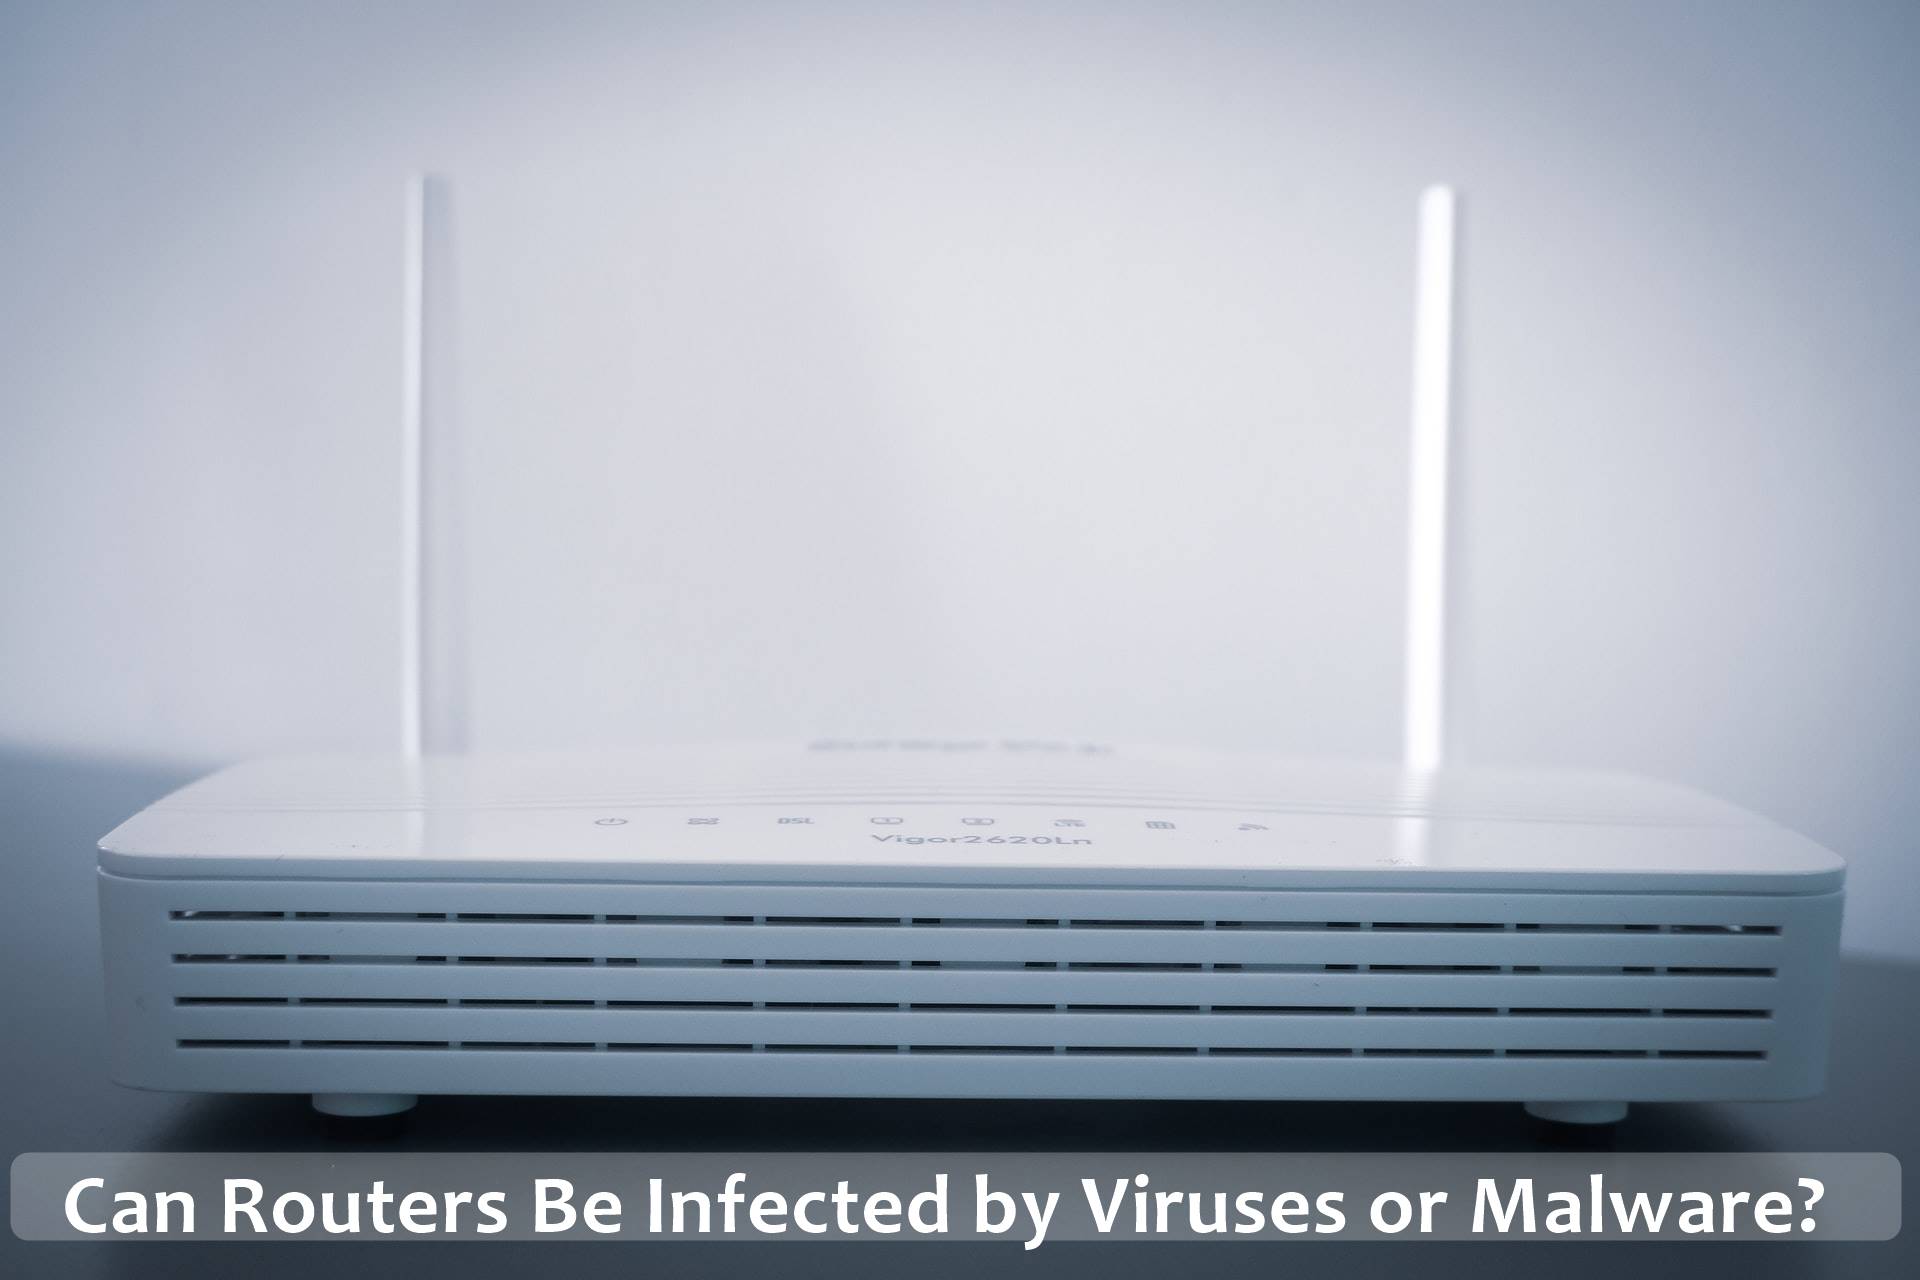 Can Routers Be Infected by Viruses or Malware?